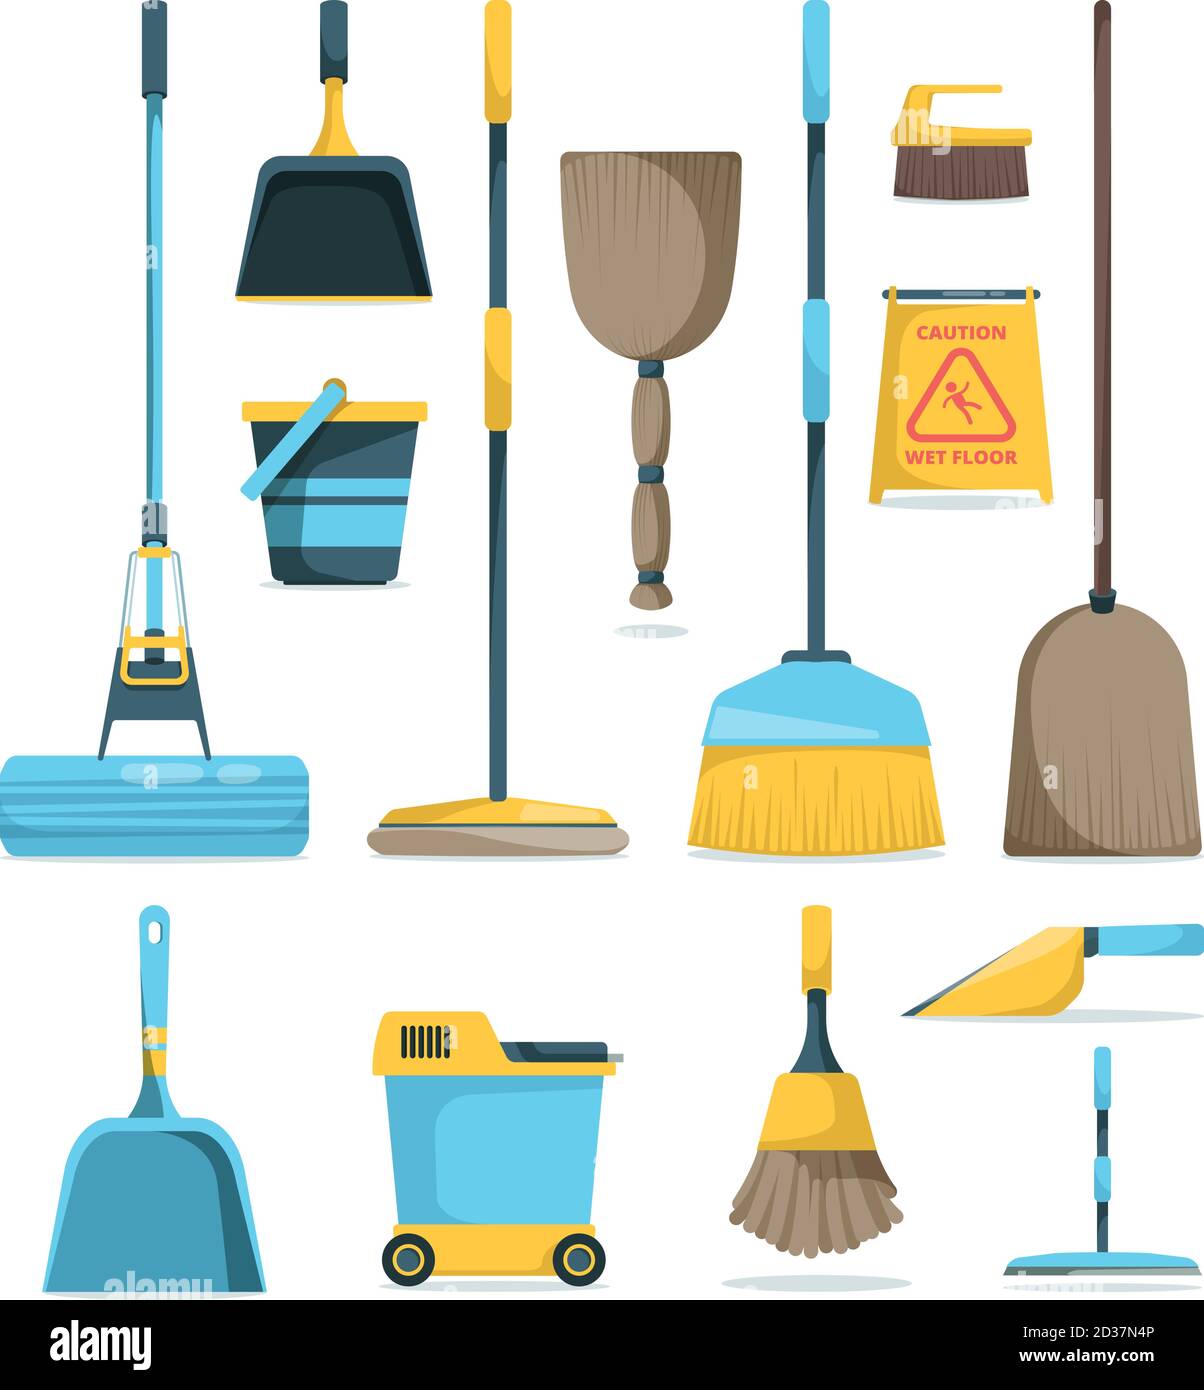 Broom and mops. Hygiene room housework supply household equipment for cleaning handle brooms vector cartoon pictures Stock Vector